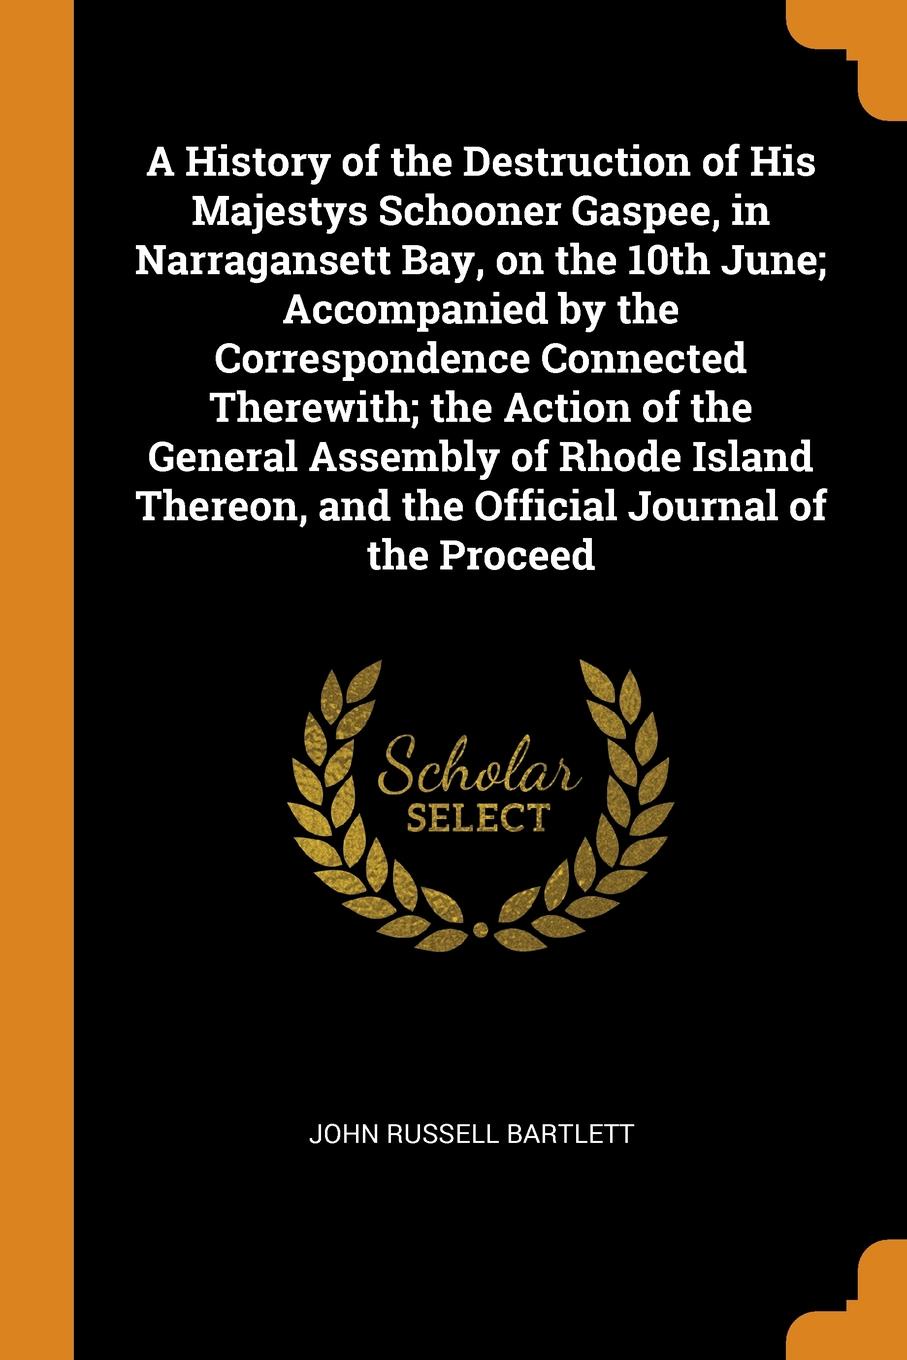 A History of the Destruction of His Majestys Schooner Gaspee, in Narragansett Bay, on the 10th June; Accompanied by the Correspondence Connected Therewith; the Action of the General Assembly of Rhode Island Thereon, and the Official Journal of the...